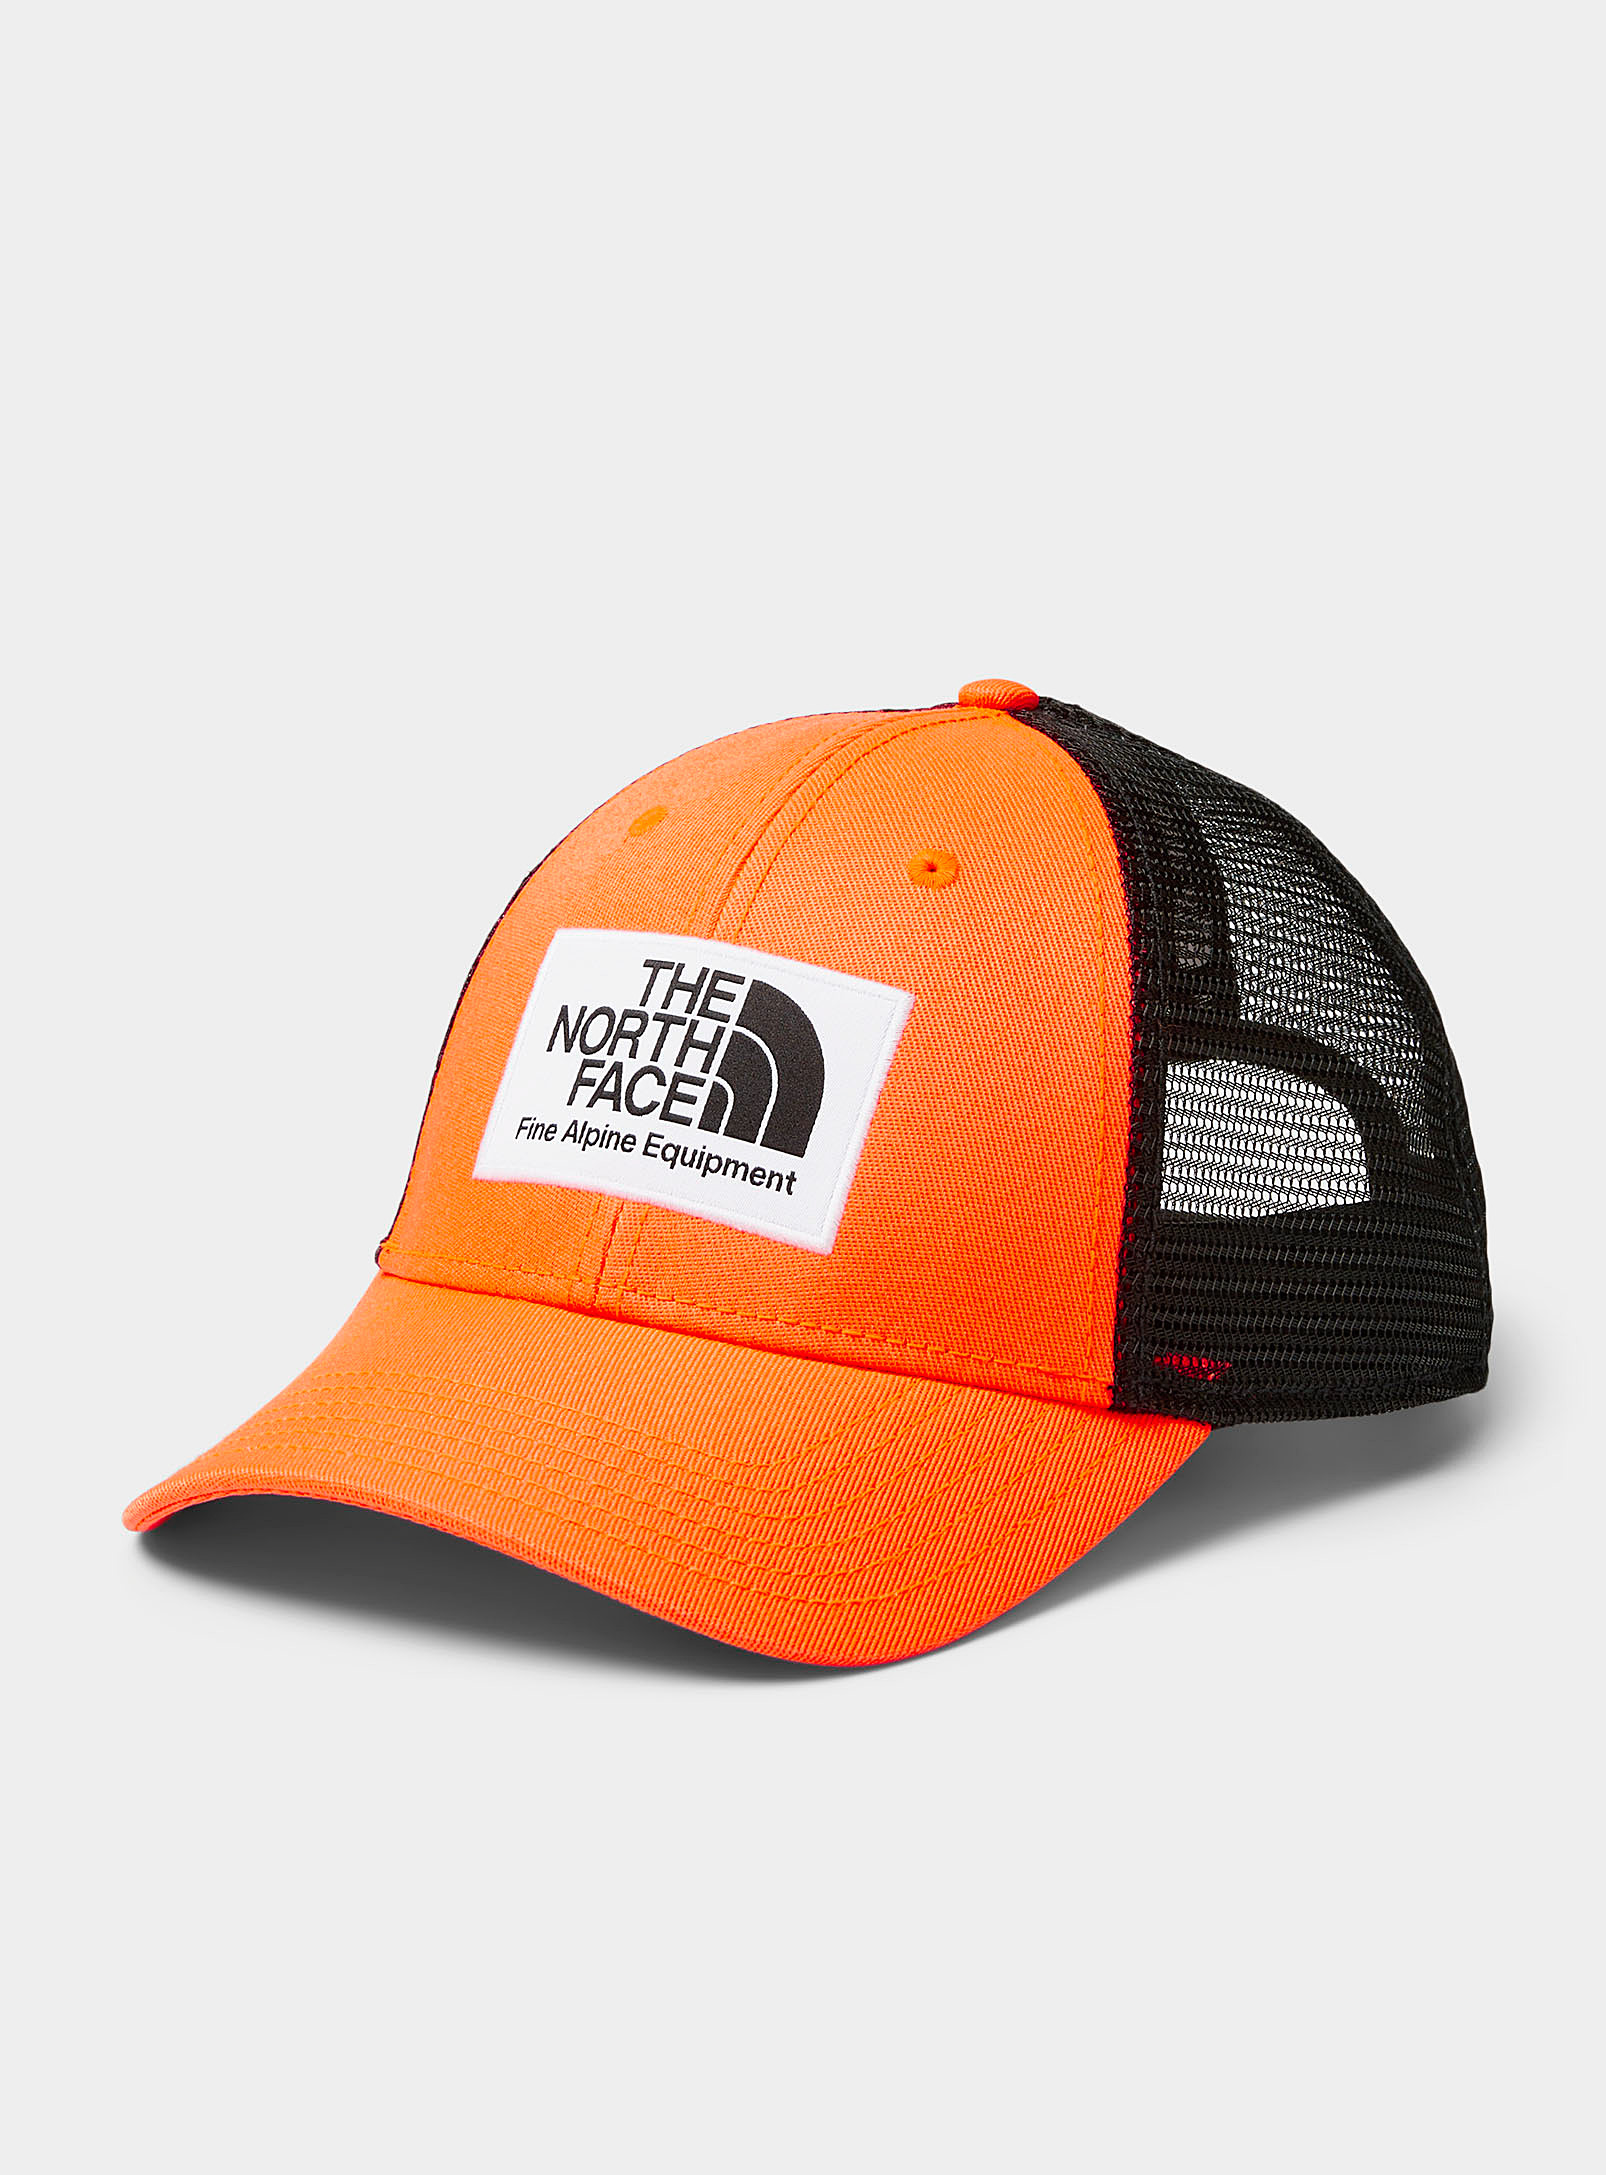 The North Face Mudder Trucker Cap In Patterned Red